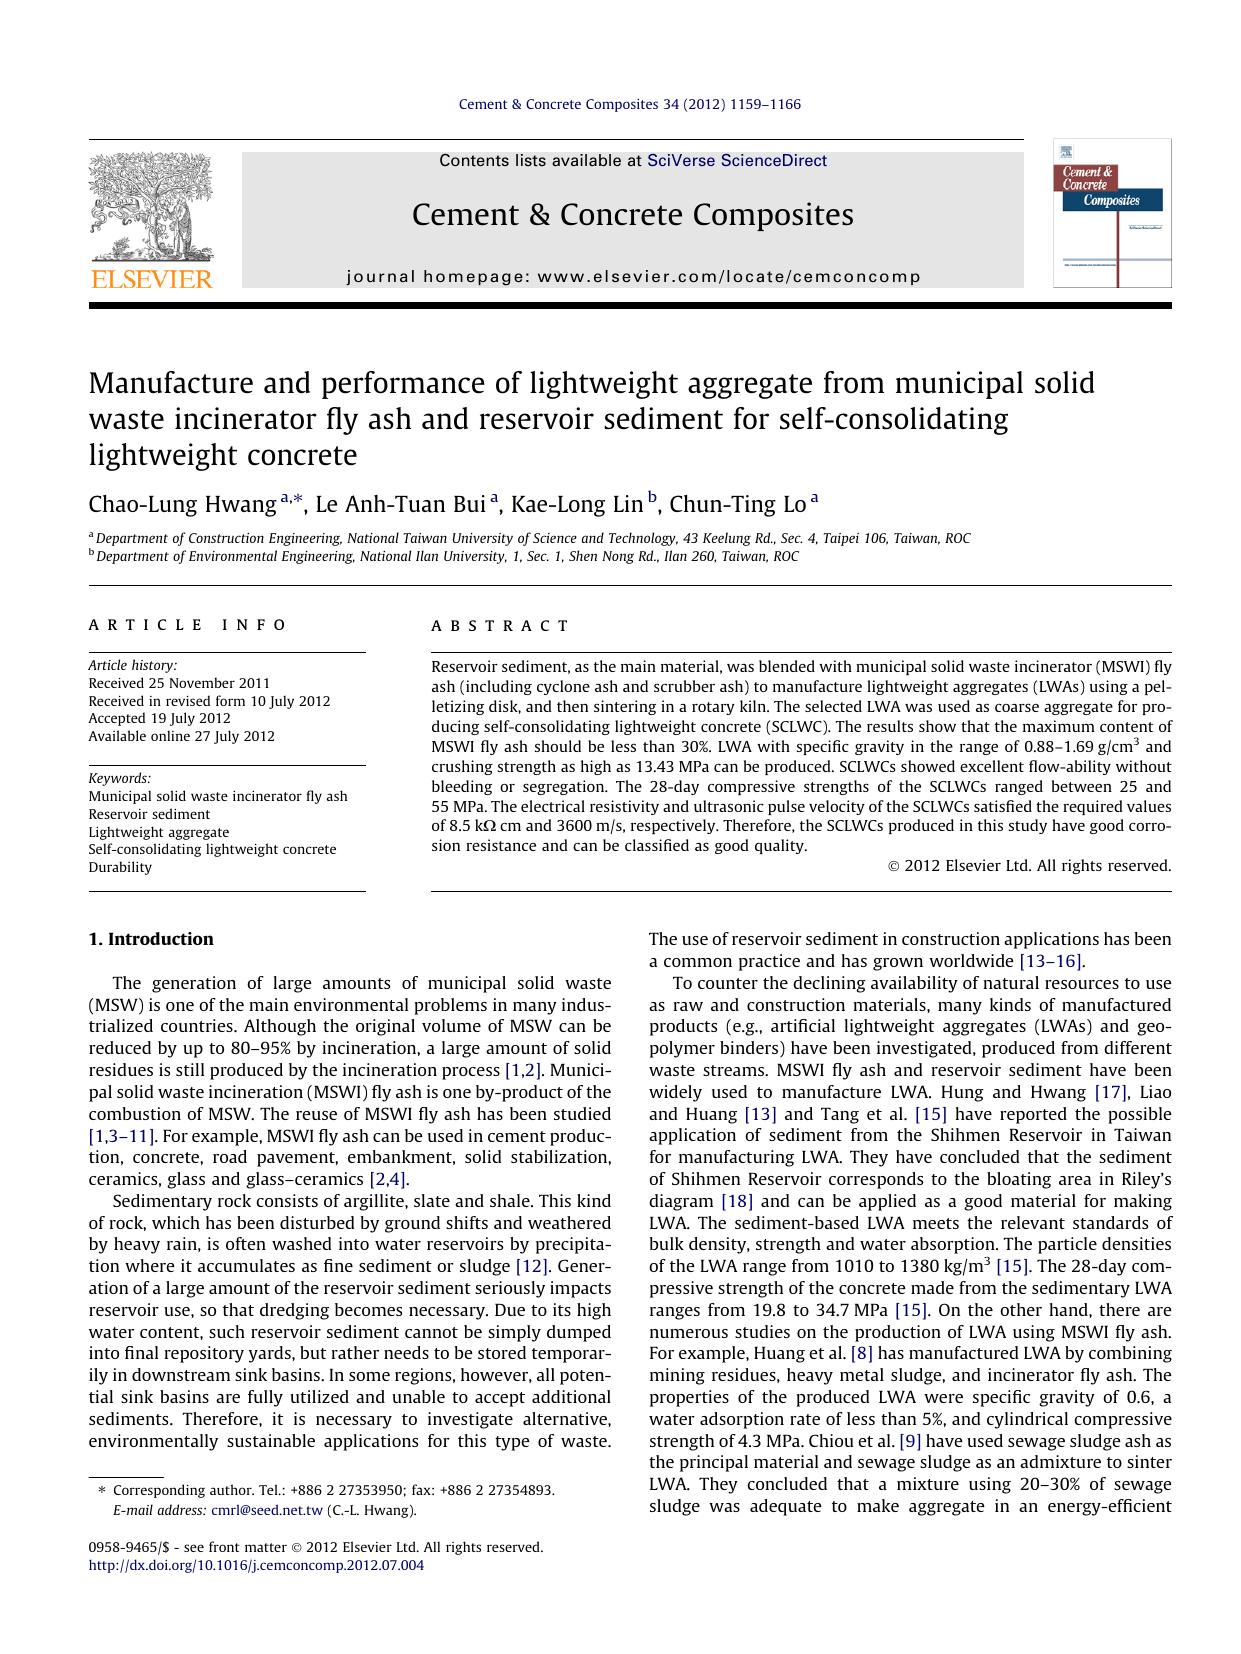 Manufacture and performance of lightweight aggregate from municipal solid waste incinerator fly ash and reservoir sediment for self-consolidating lightweight concrete by Chao-Lung Hwang & Le Anh-Tuan Bui & Kae-Long Lin & Chun-Ting Lo